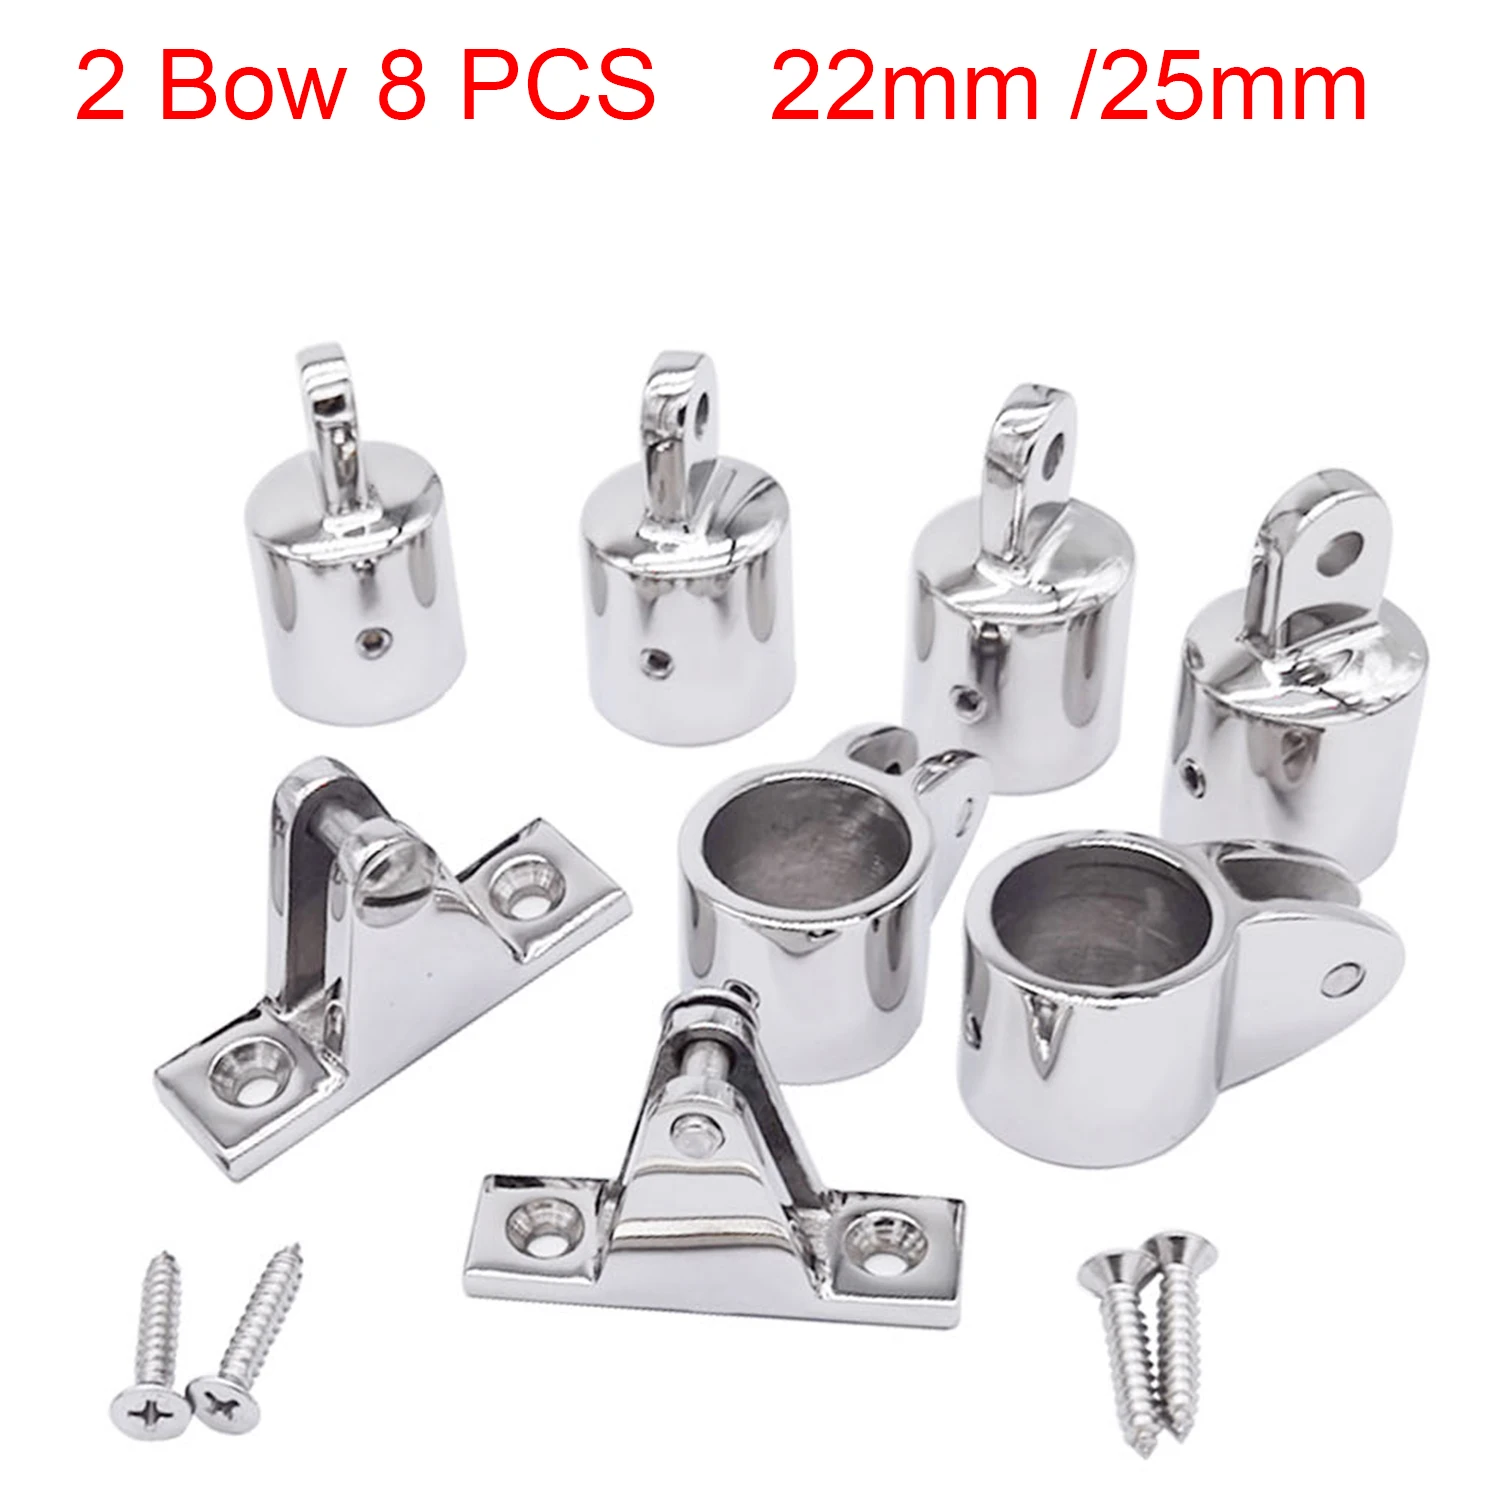 stainless steel 316 jaw slide clamp with quick release pin lanyard 1 inch 25mm bimini top hinged slide fitting hardware marine 8 PCS Marine 316 Stainless Steel 2-Bow Bimini Top Hardware Fitting Set Deck Hinge Jaw Slide Eye End Fitting for 22/25mm Pipe